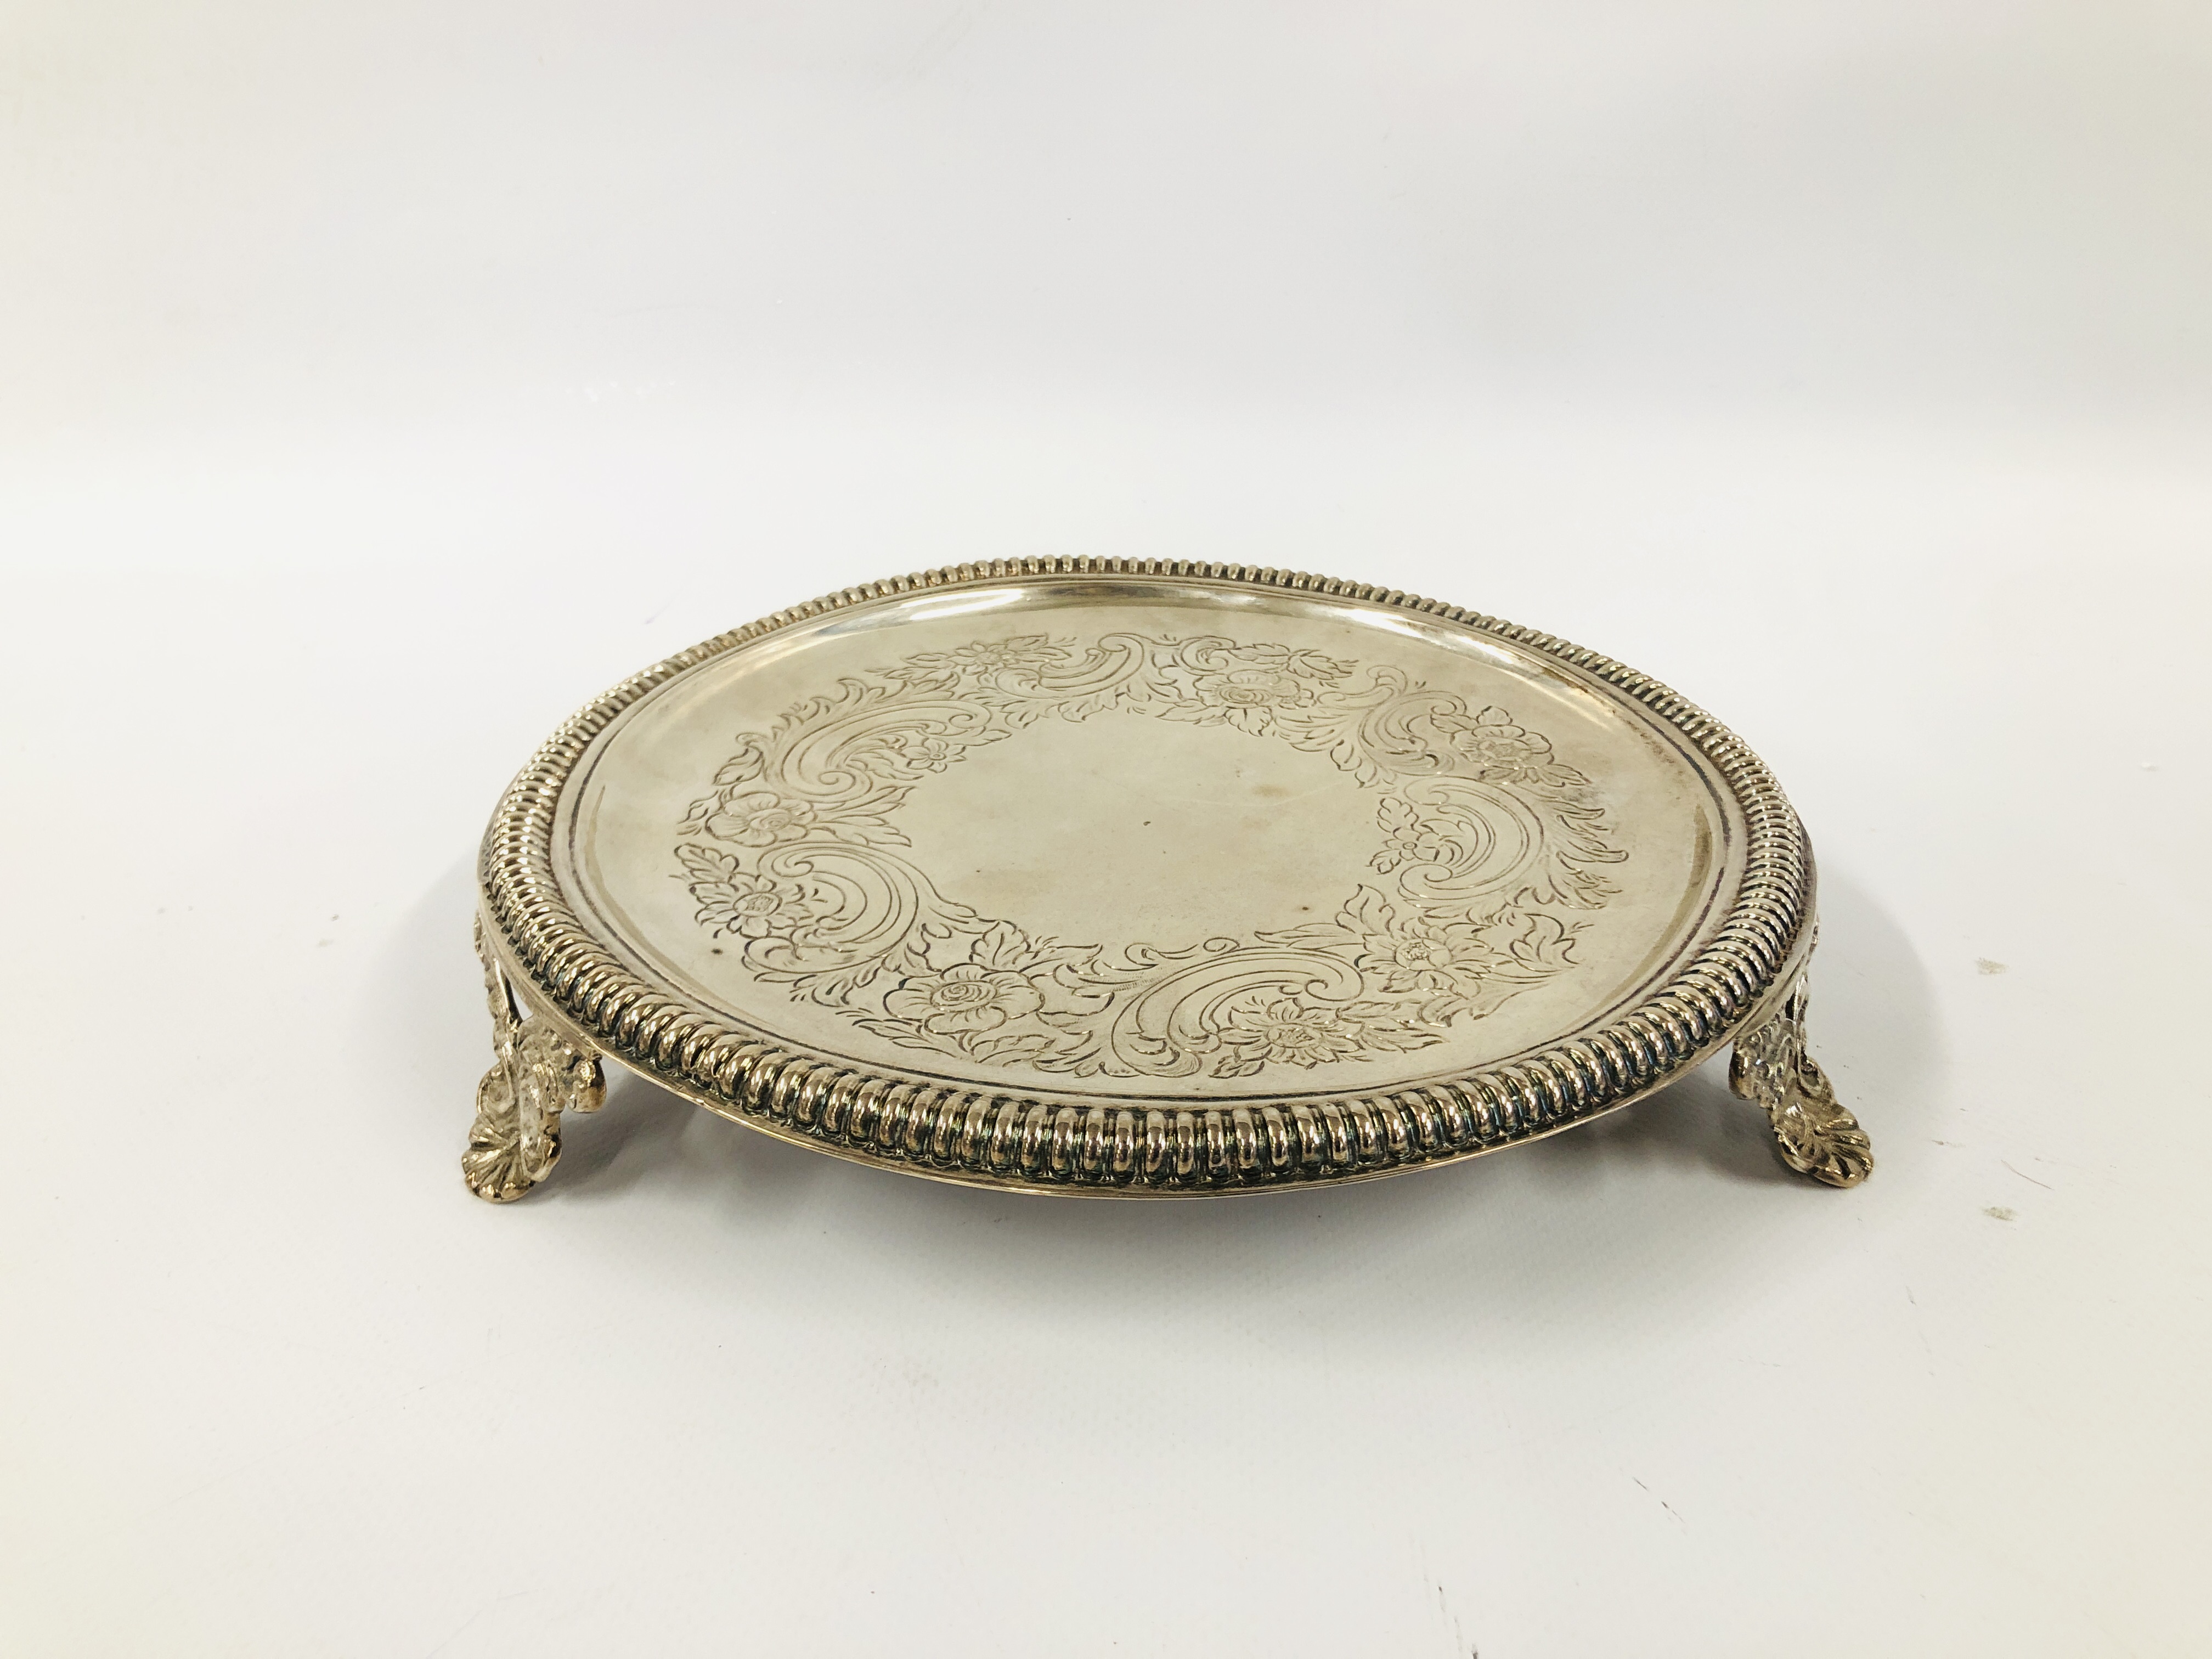 A SILVER CIRCULAR SALVER WITH NULLED RIM ON SCROLLED TRIPOD FEET BY JOESEPH WALKER OF DUBLIN C17